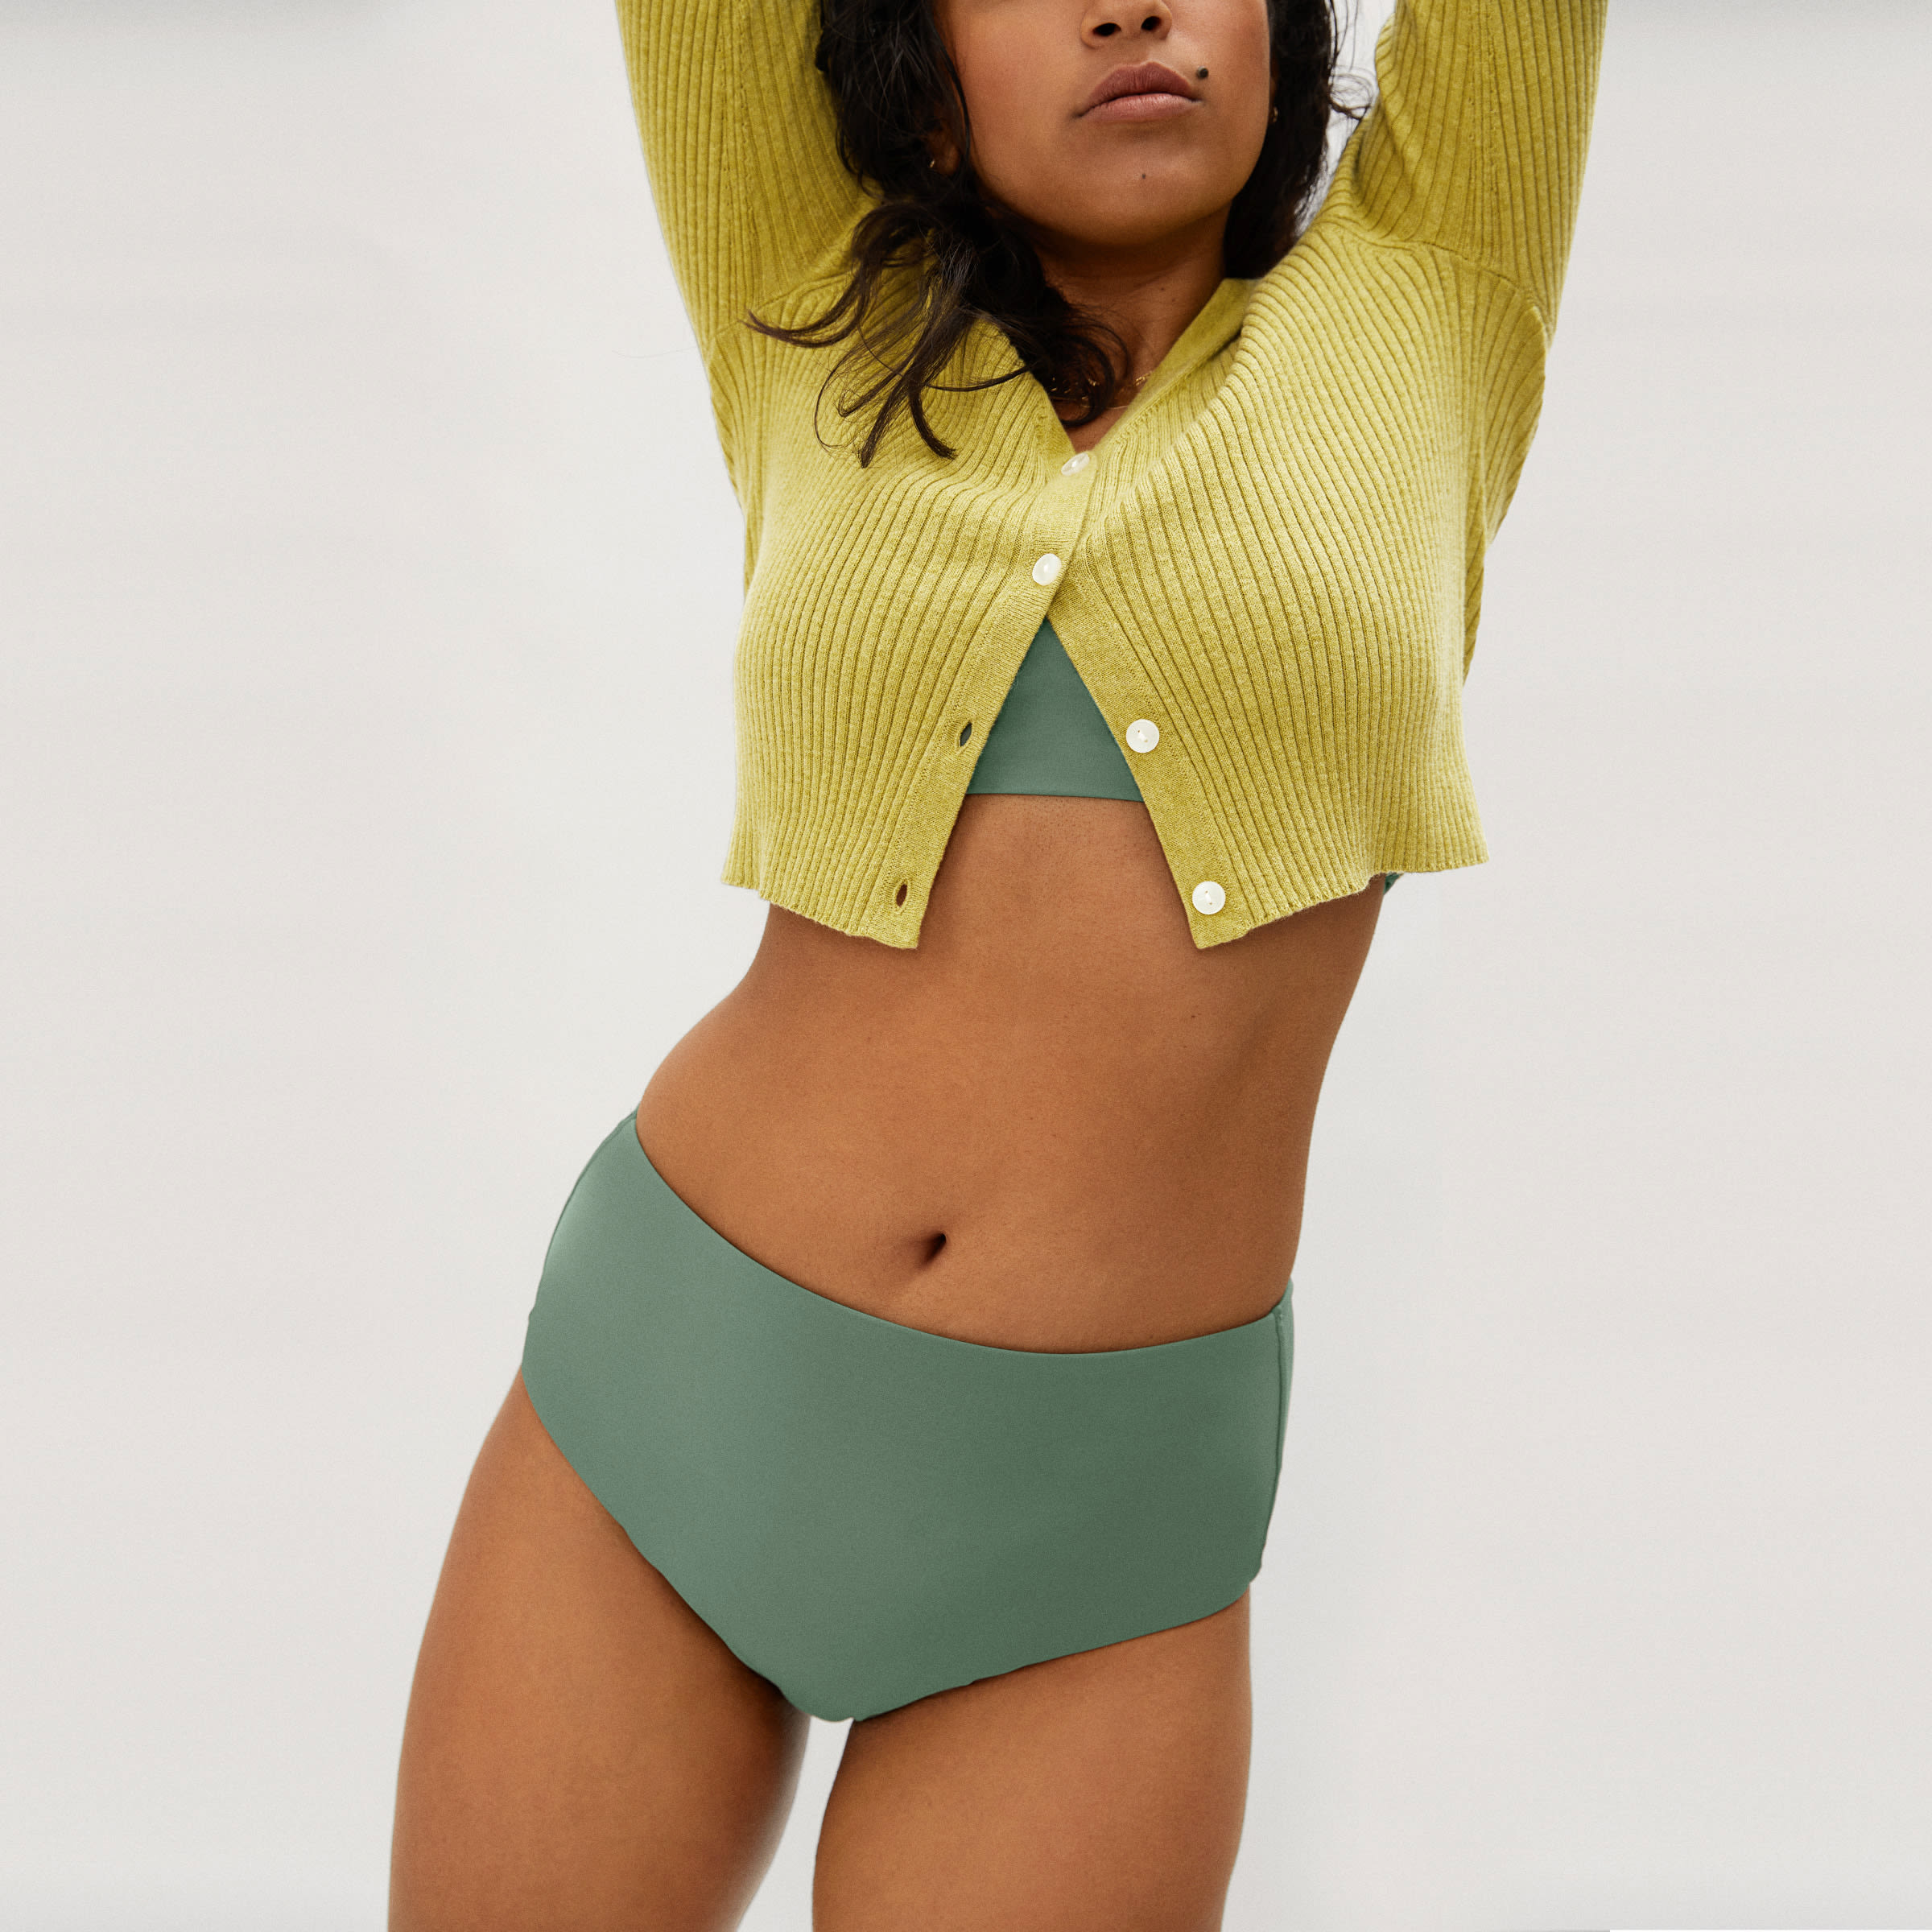 Everlane Swimwear Review - Everlane Is Finally Releasing Its First Swimwear  Collection